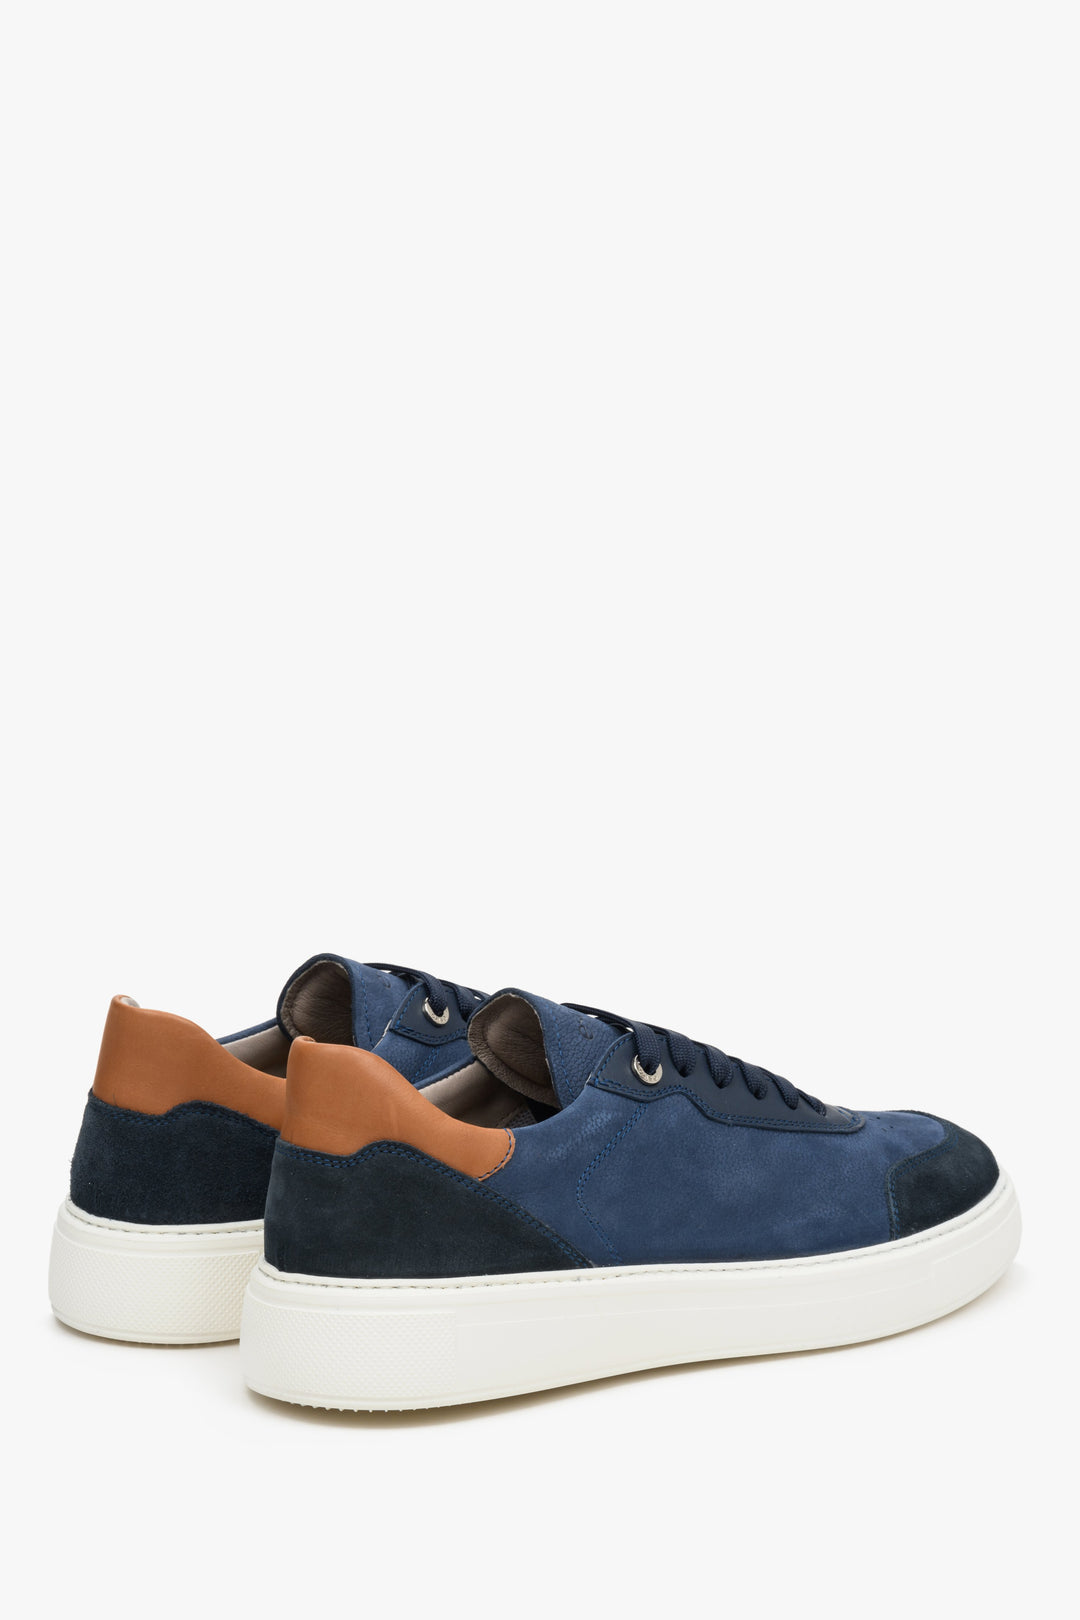 Men's sneakers in blue, brown and white nubuck and Estro leather - close-up on the heel.